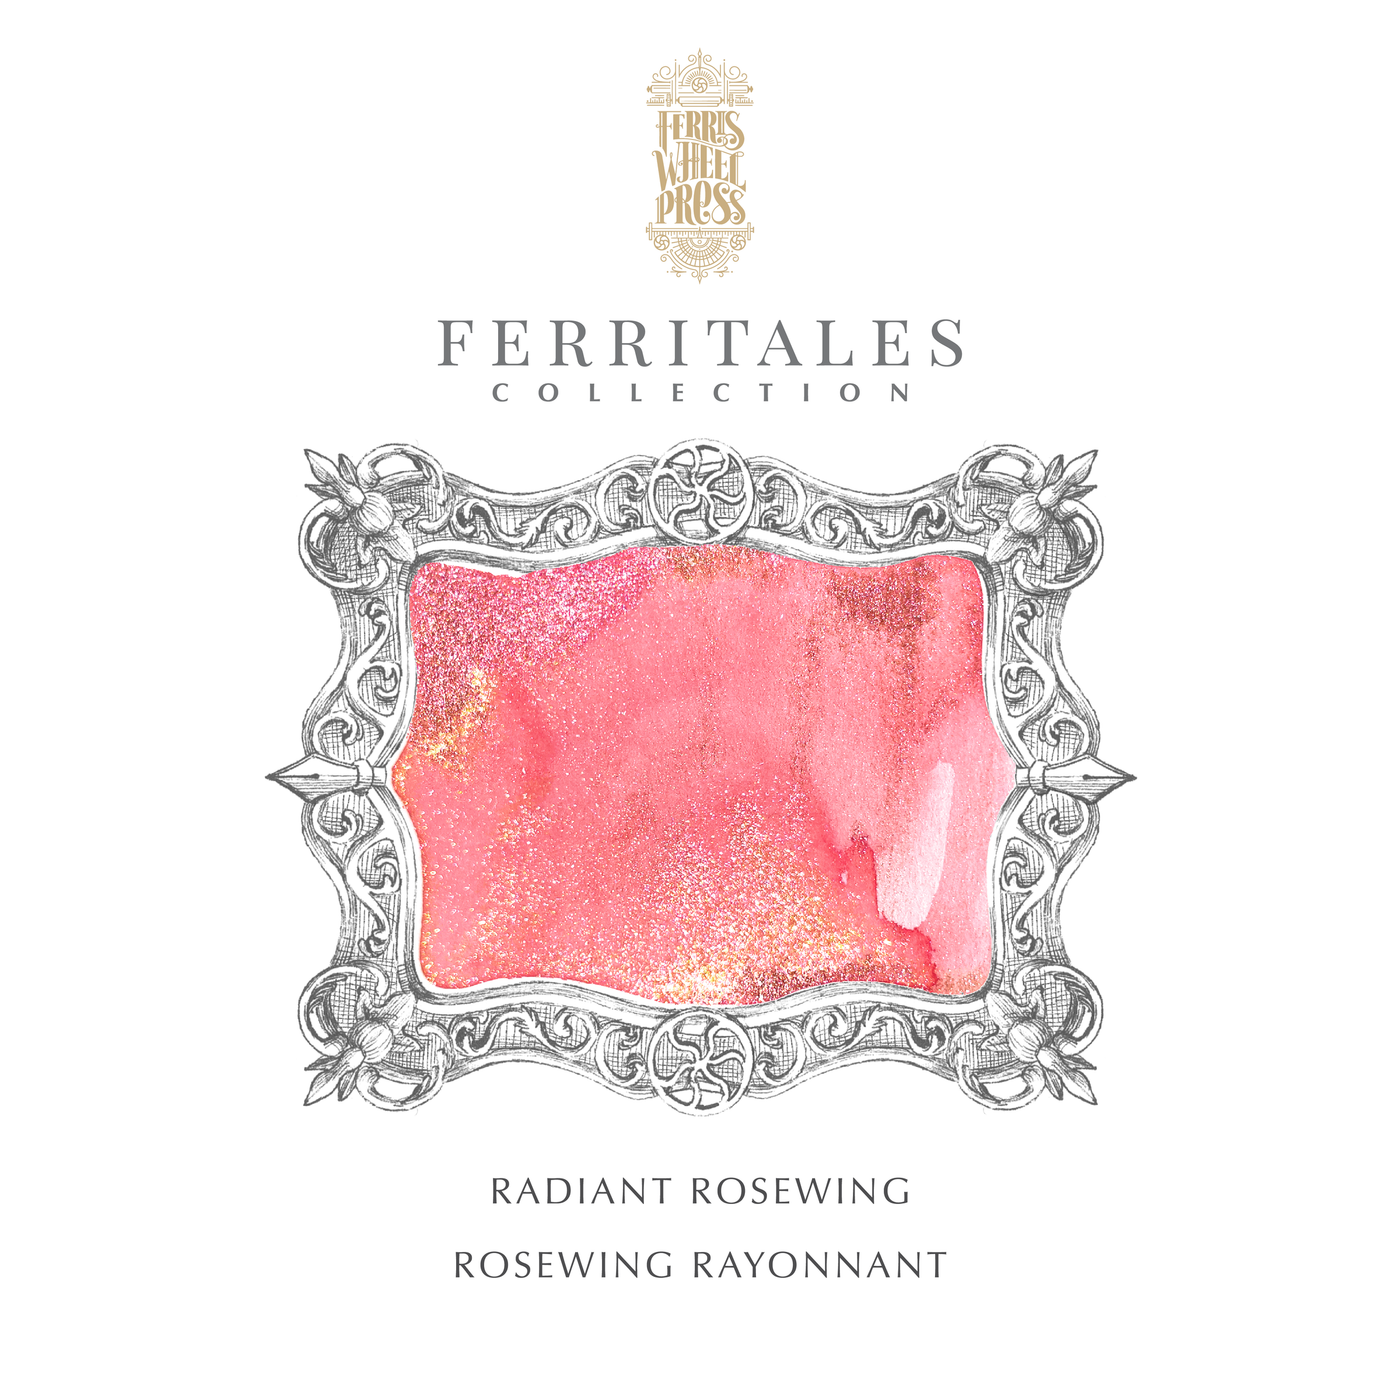 Ferris Wheel Press Radiant Rosewing- 20ml bottled Ink (Special Edition)